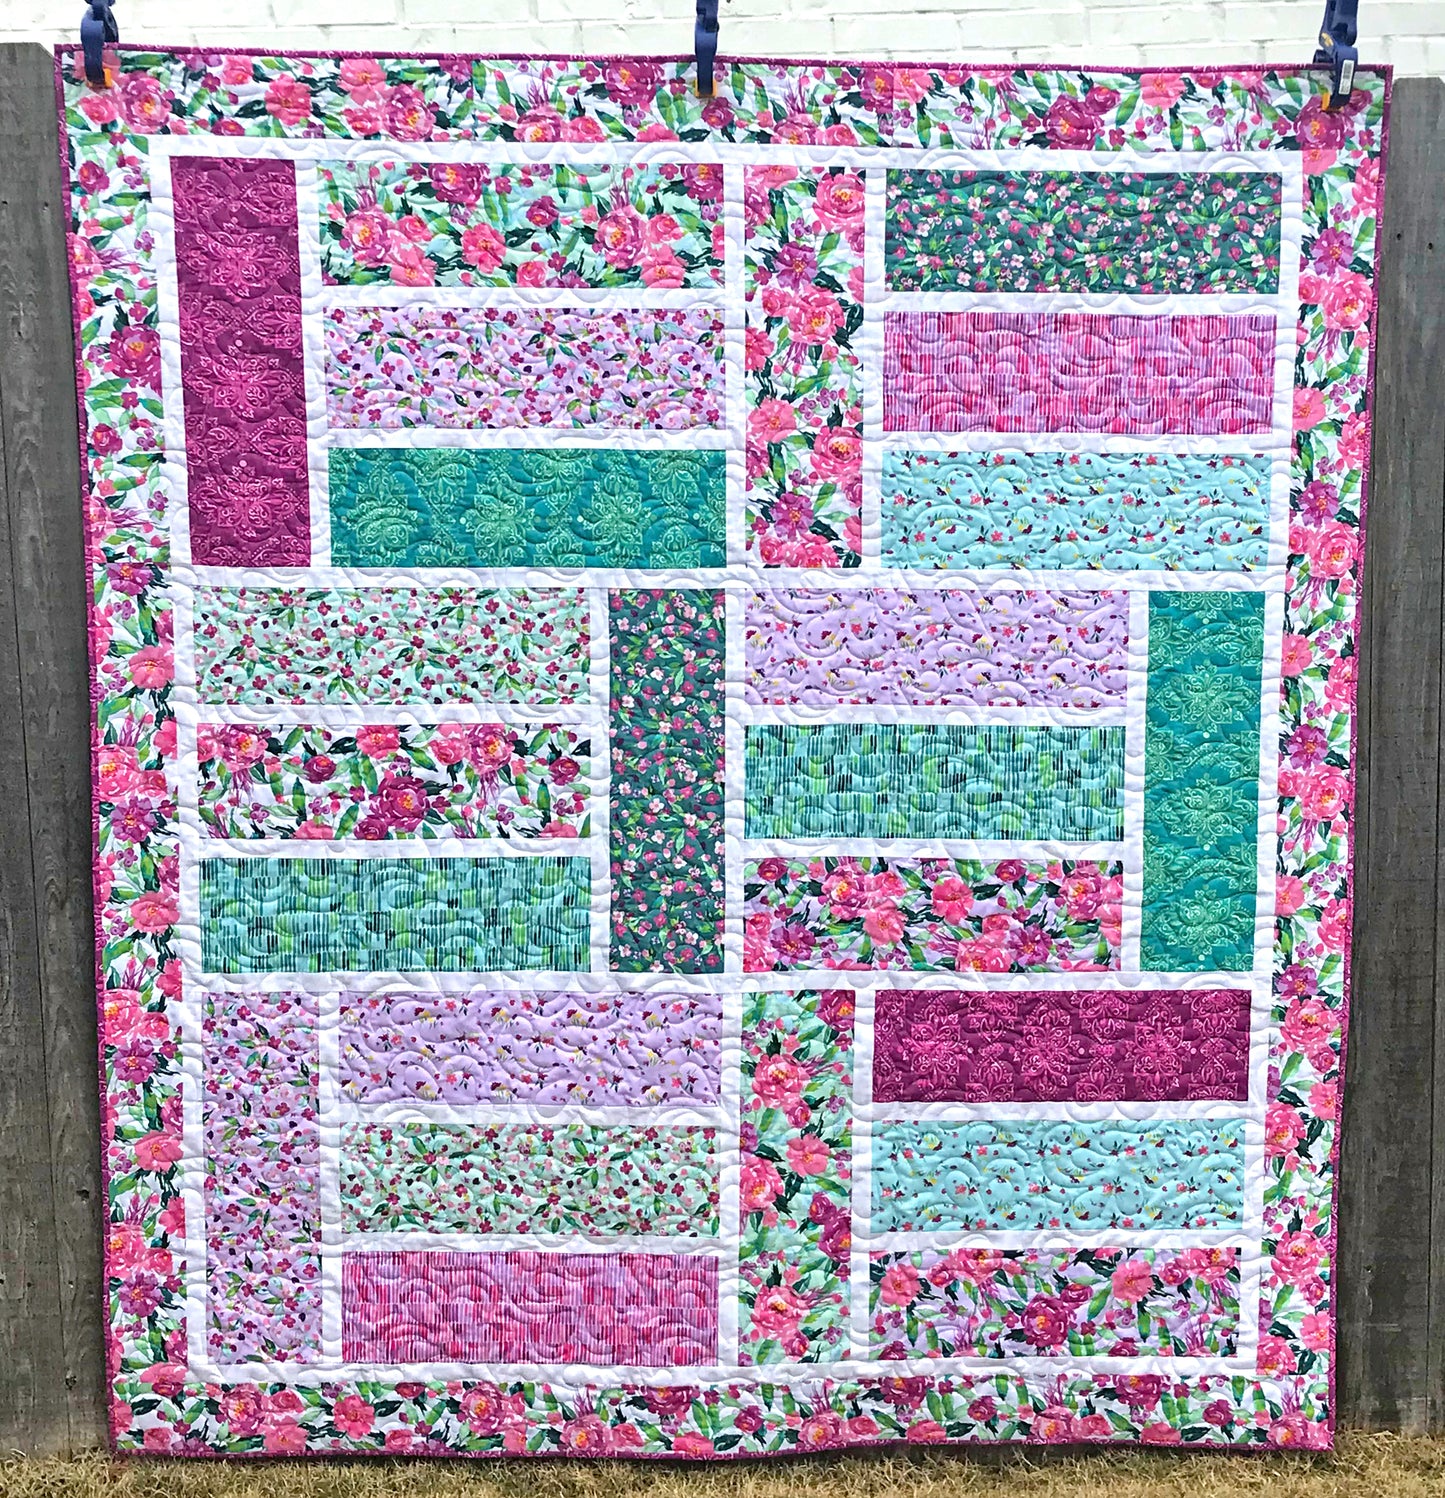 The Big Easy Quilt Pattern - Digital Quilt Pattern - Handmade Quilts, Digital Patterns, and Home Décor items online - Cuddle Cat Quiltworks